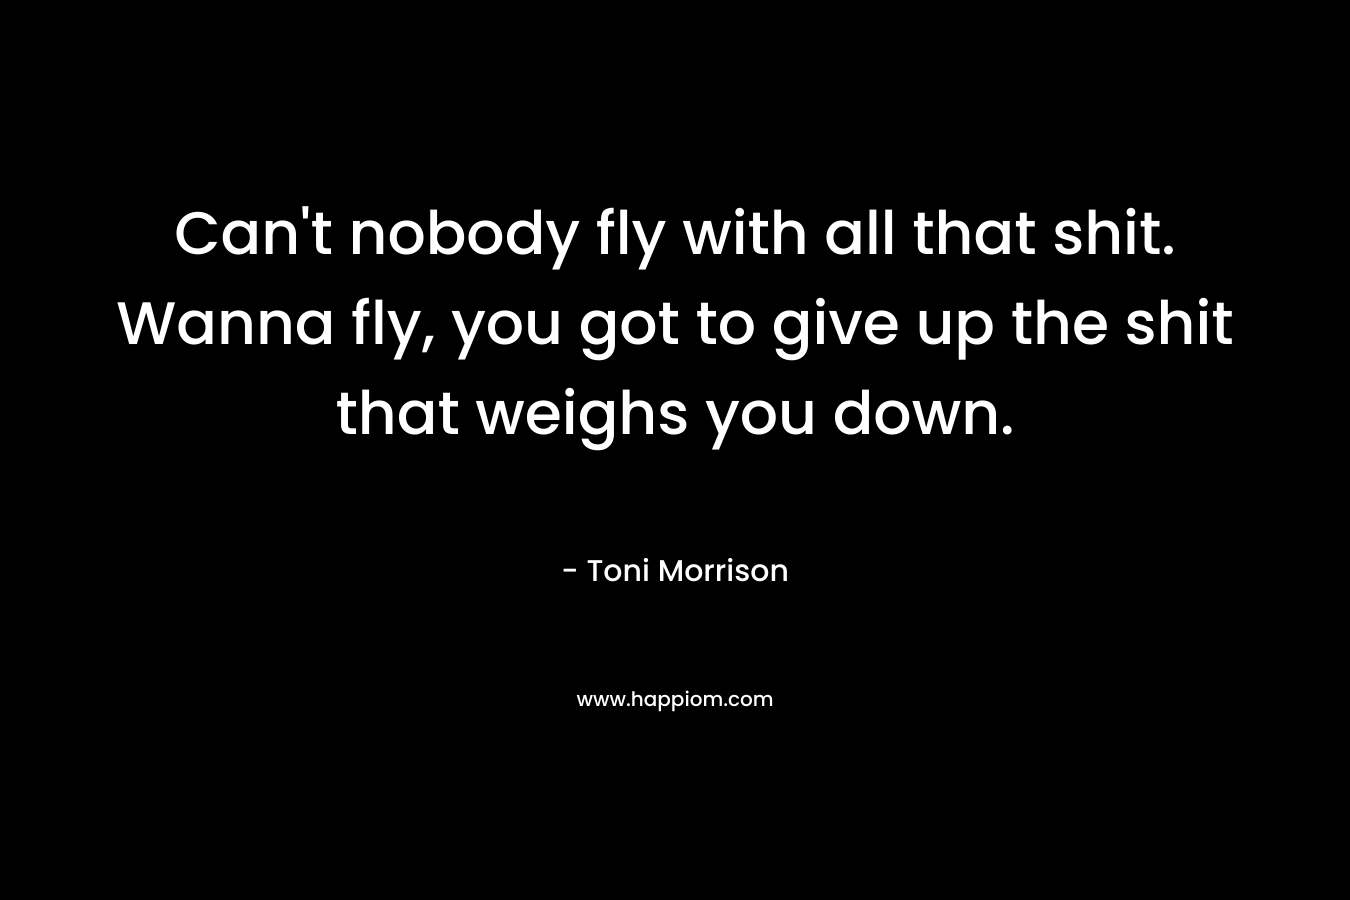 Can’t nobody fly with all that shit. Wanna fly, you got to give up the shit that weighs you down. – Toni Morrison